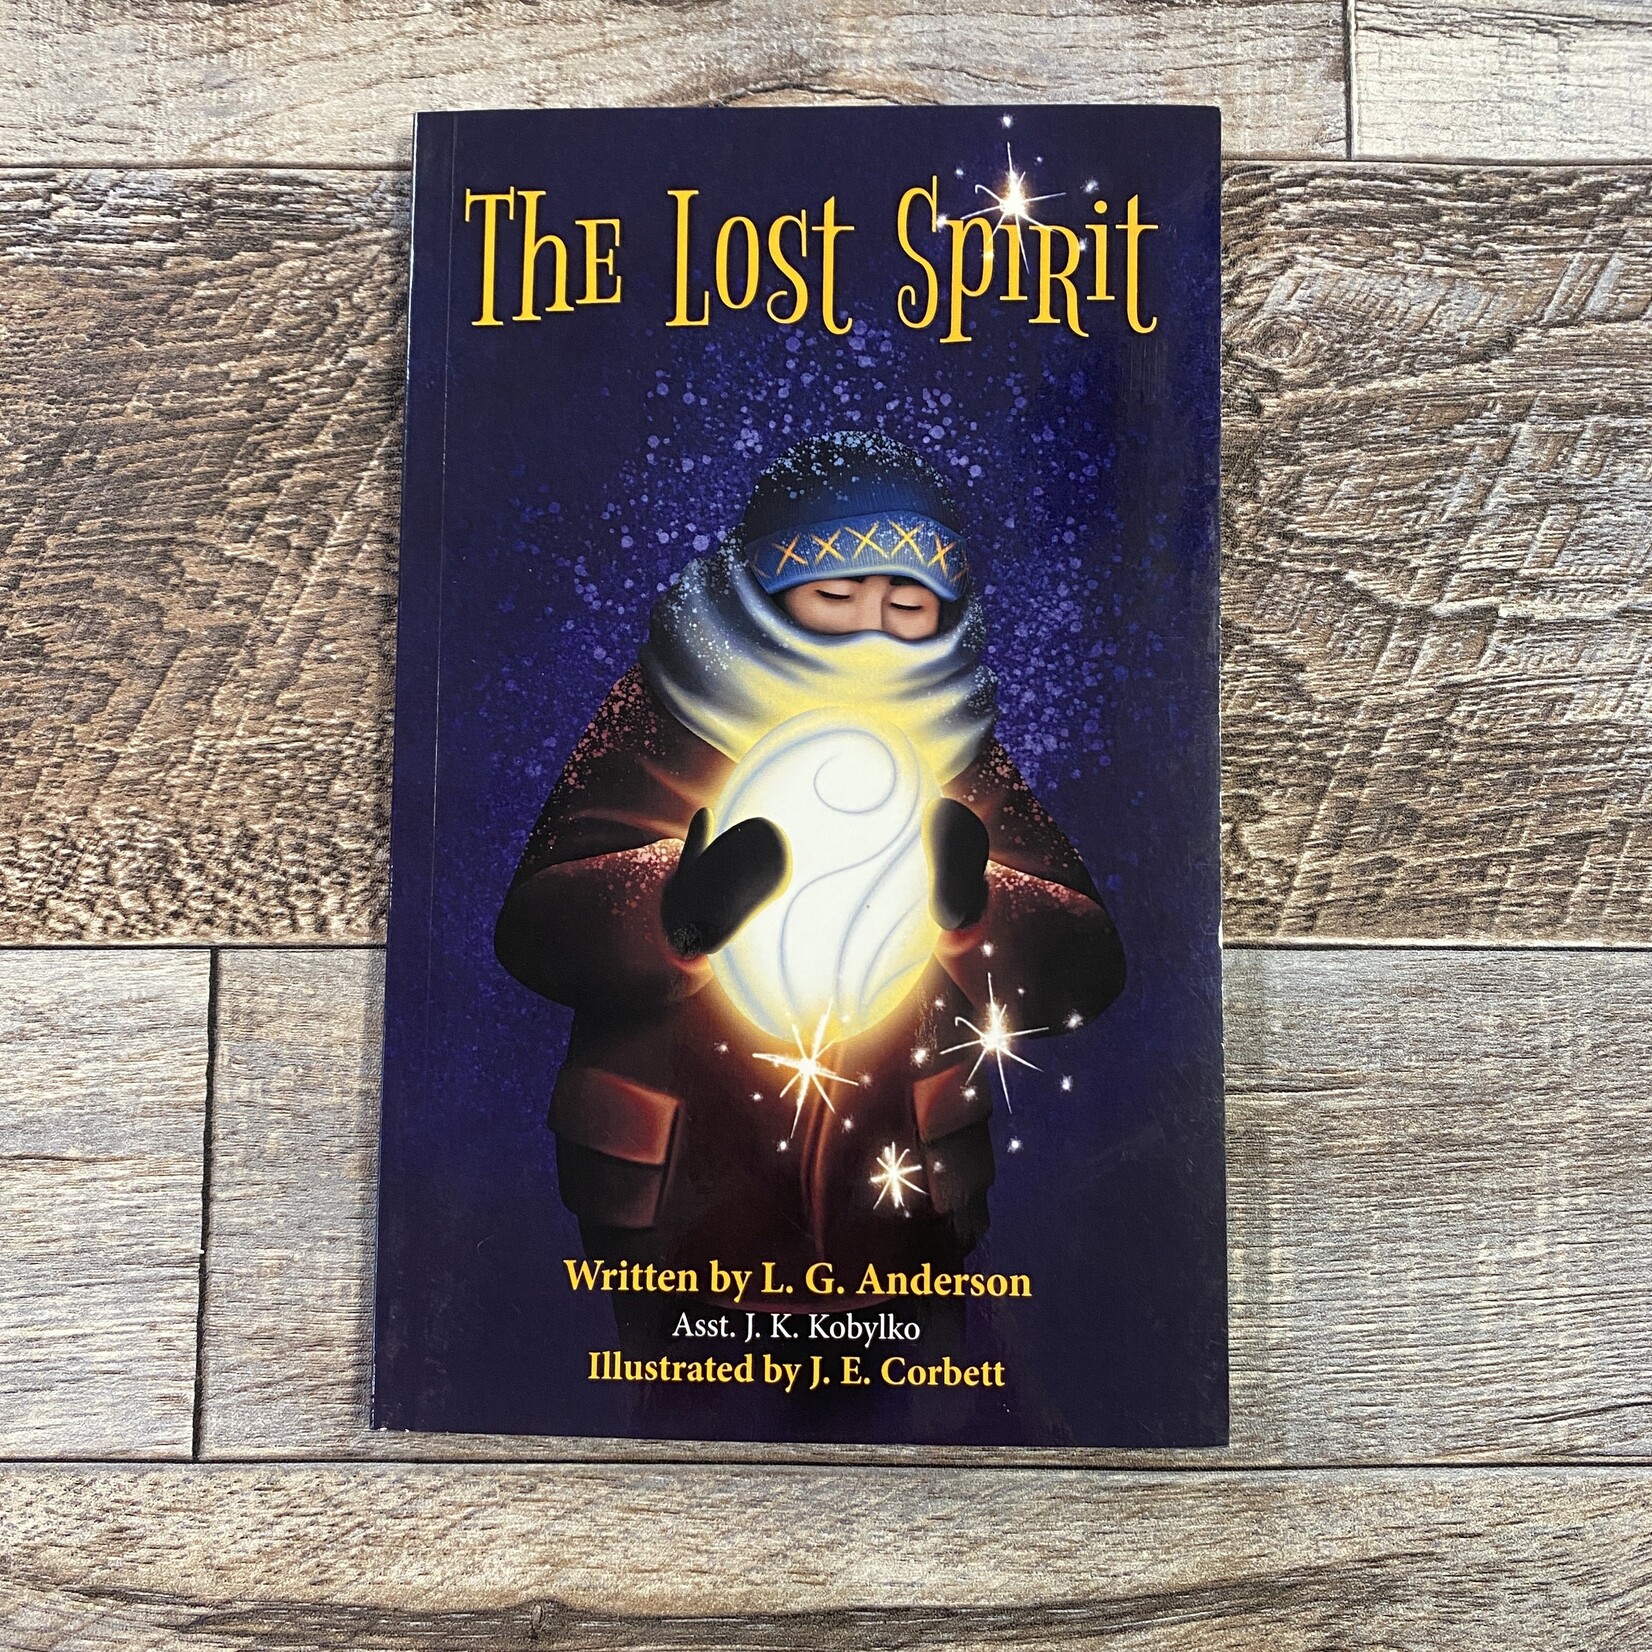 The Lost Spirit Book by L.G. Anderson